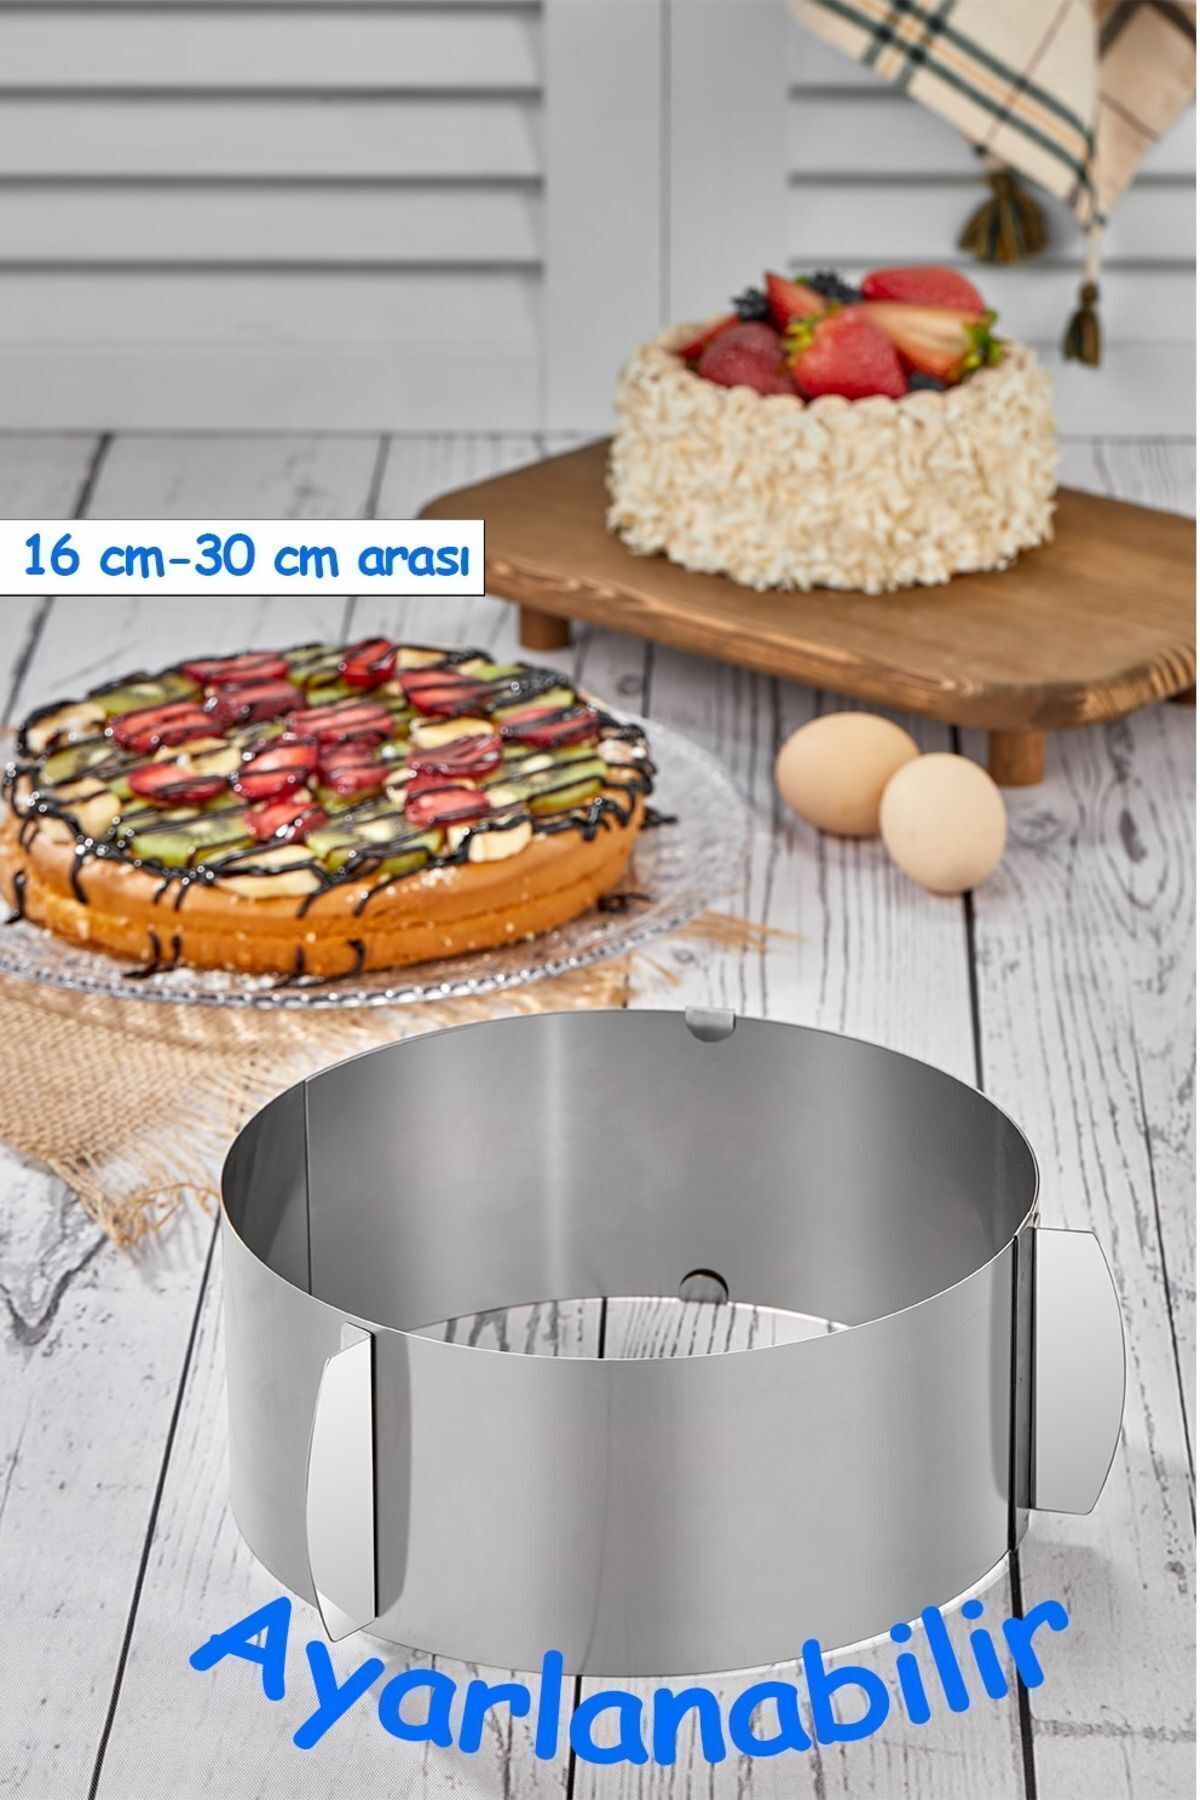 EMBHOME Cake And Cake Stainless Round Clamp Adjustable Cake Mold Circle 16/30 Cm Height 10 Cm